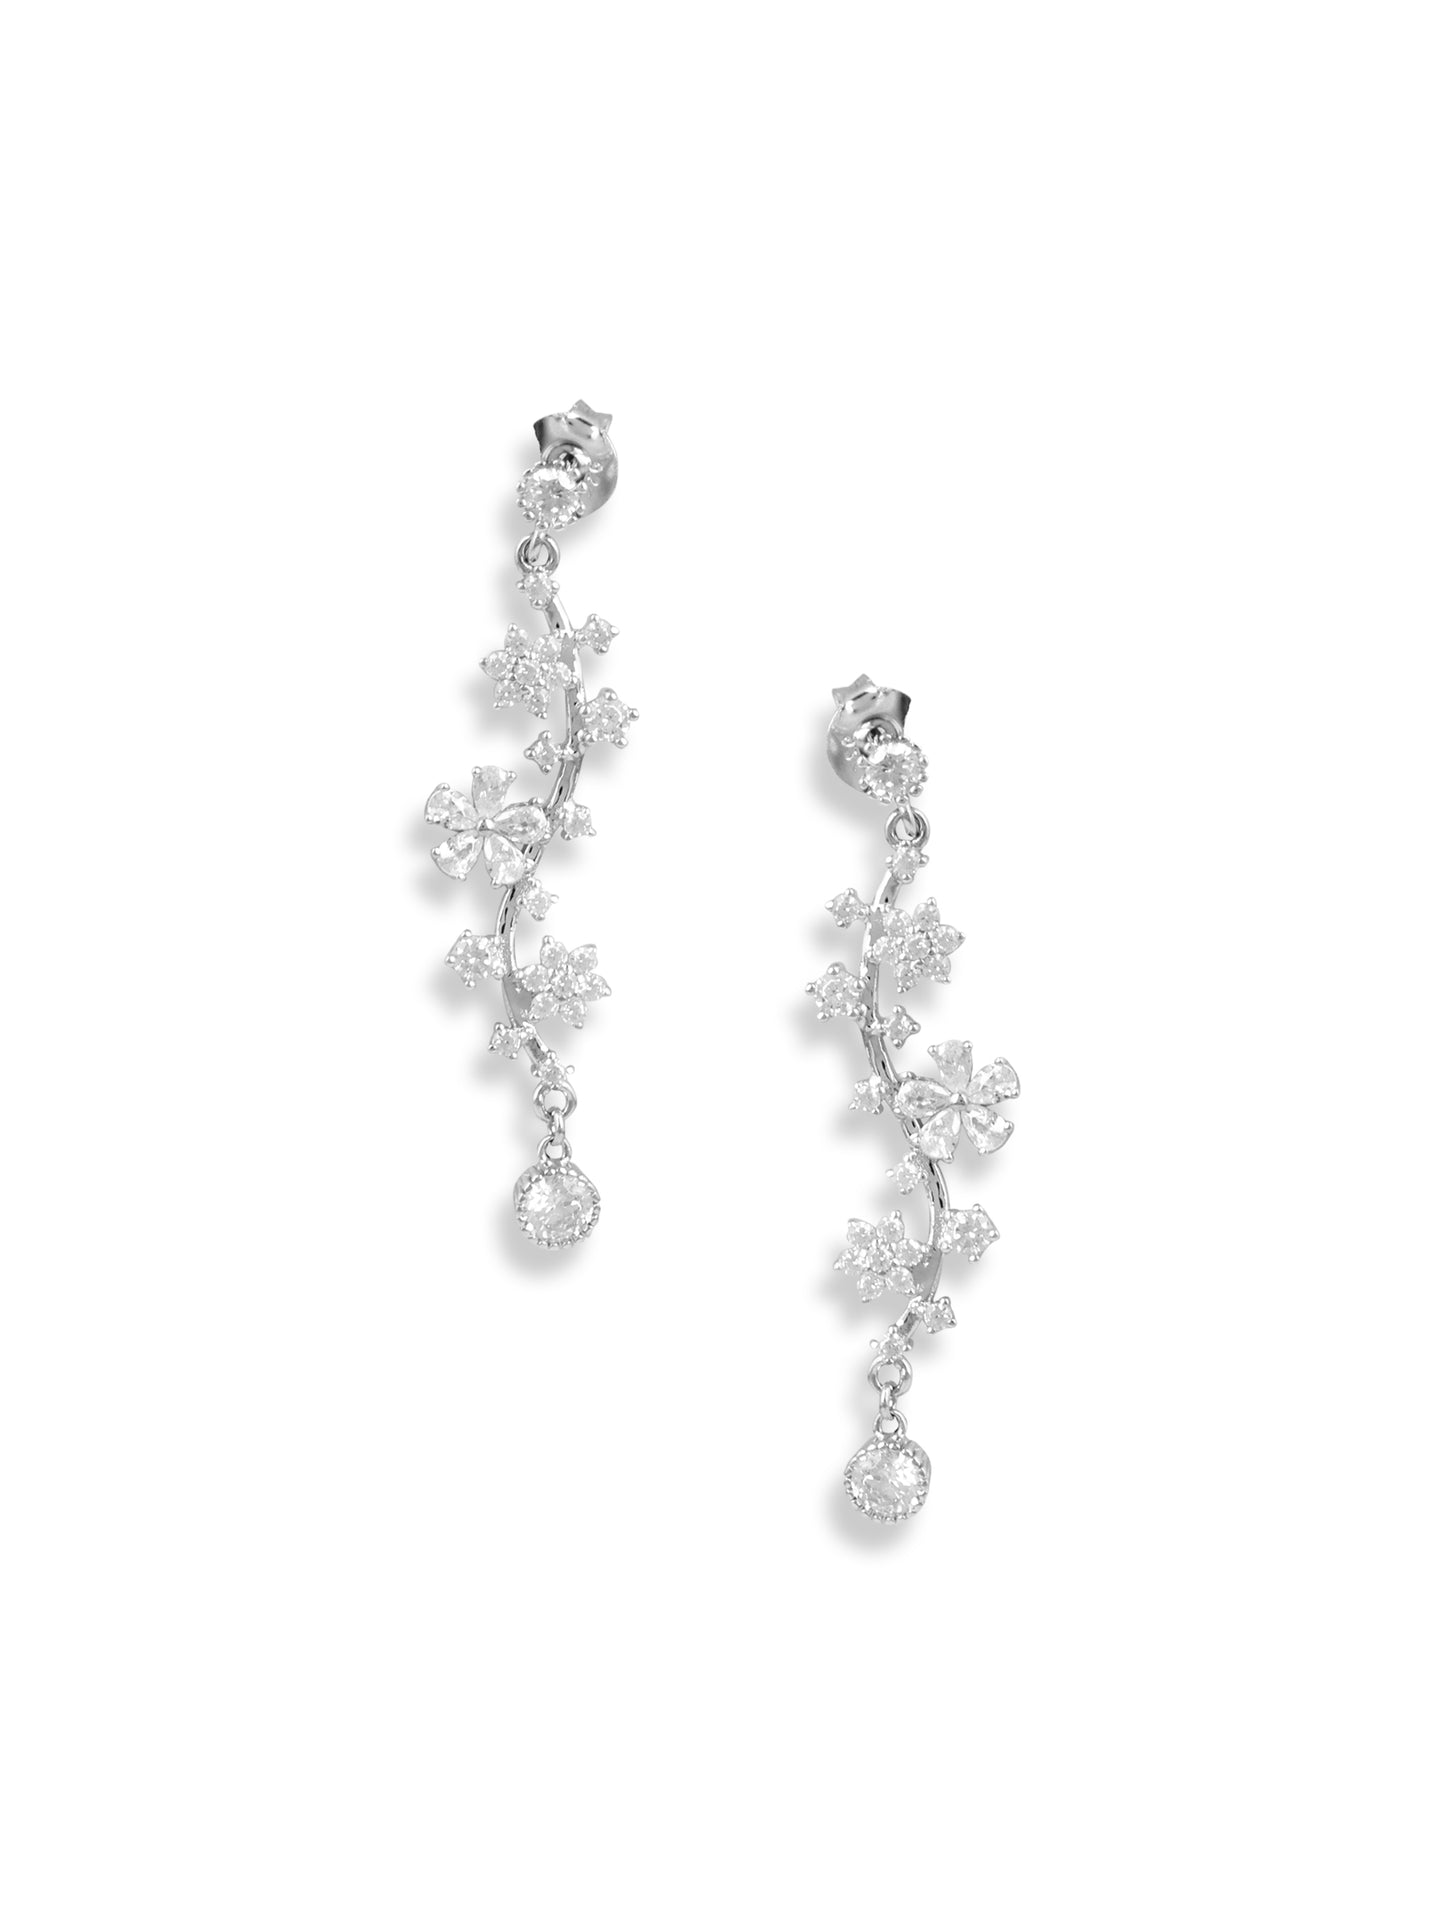 White Gold Chain with earrings of Flower droplets